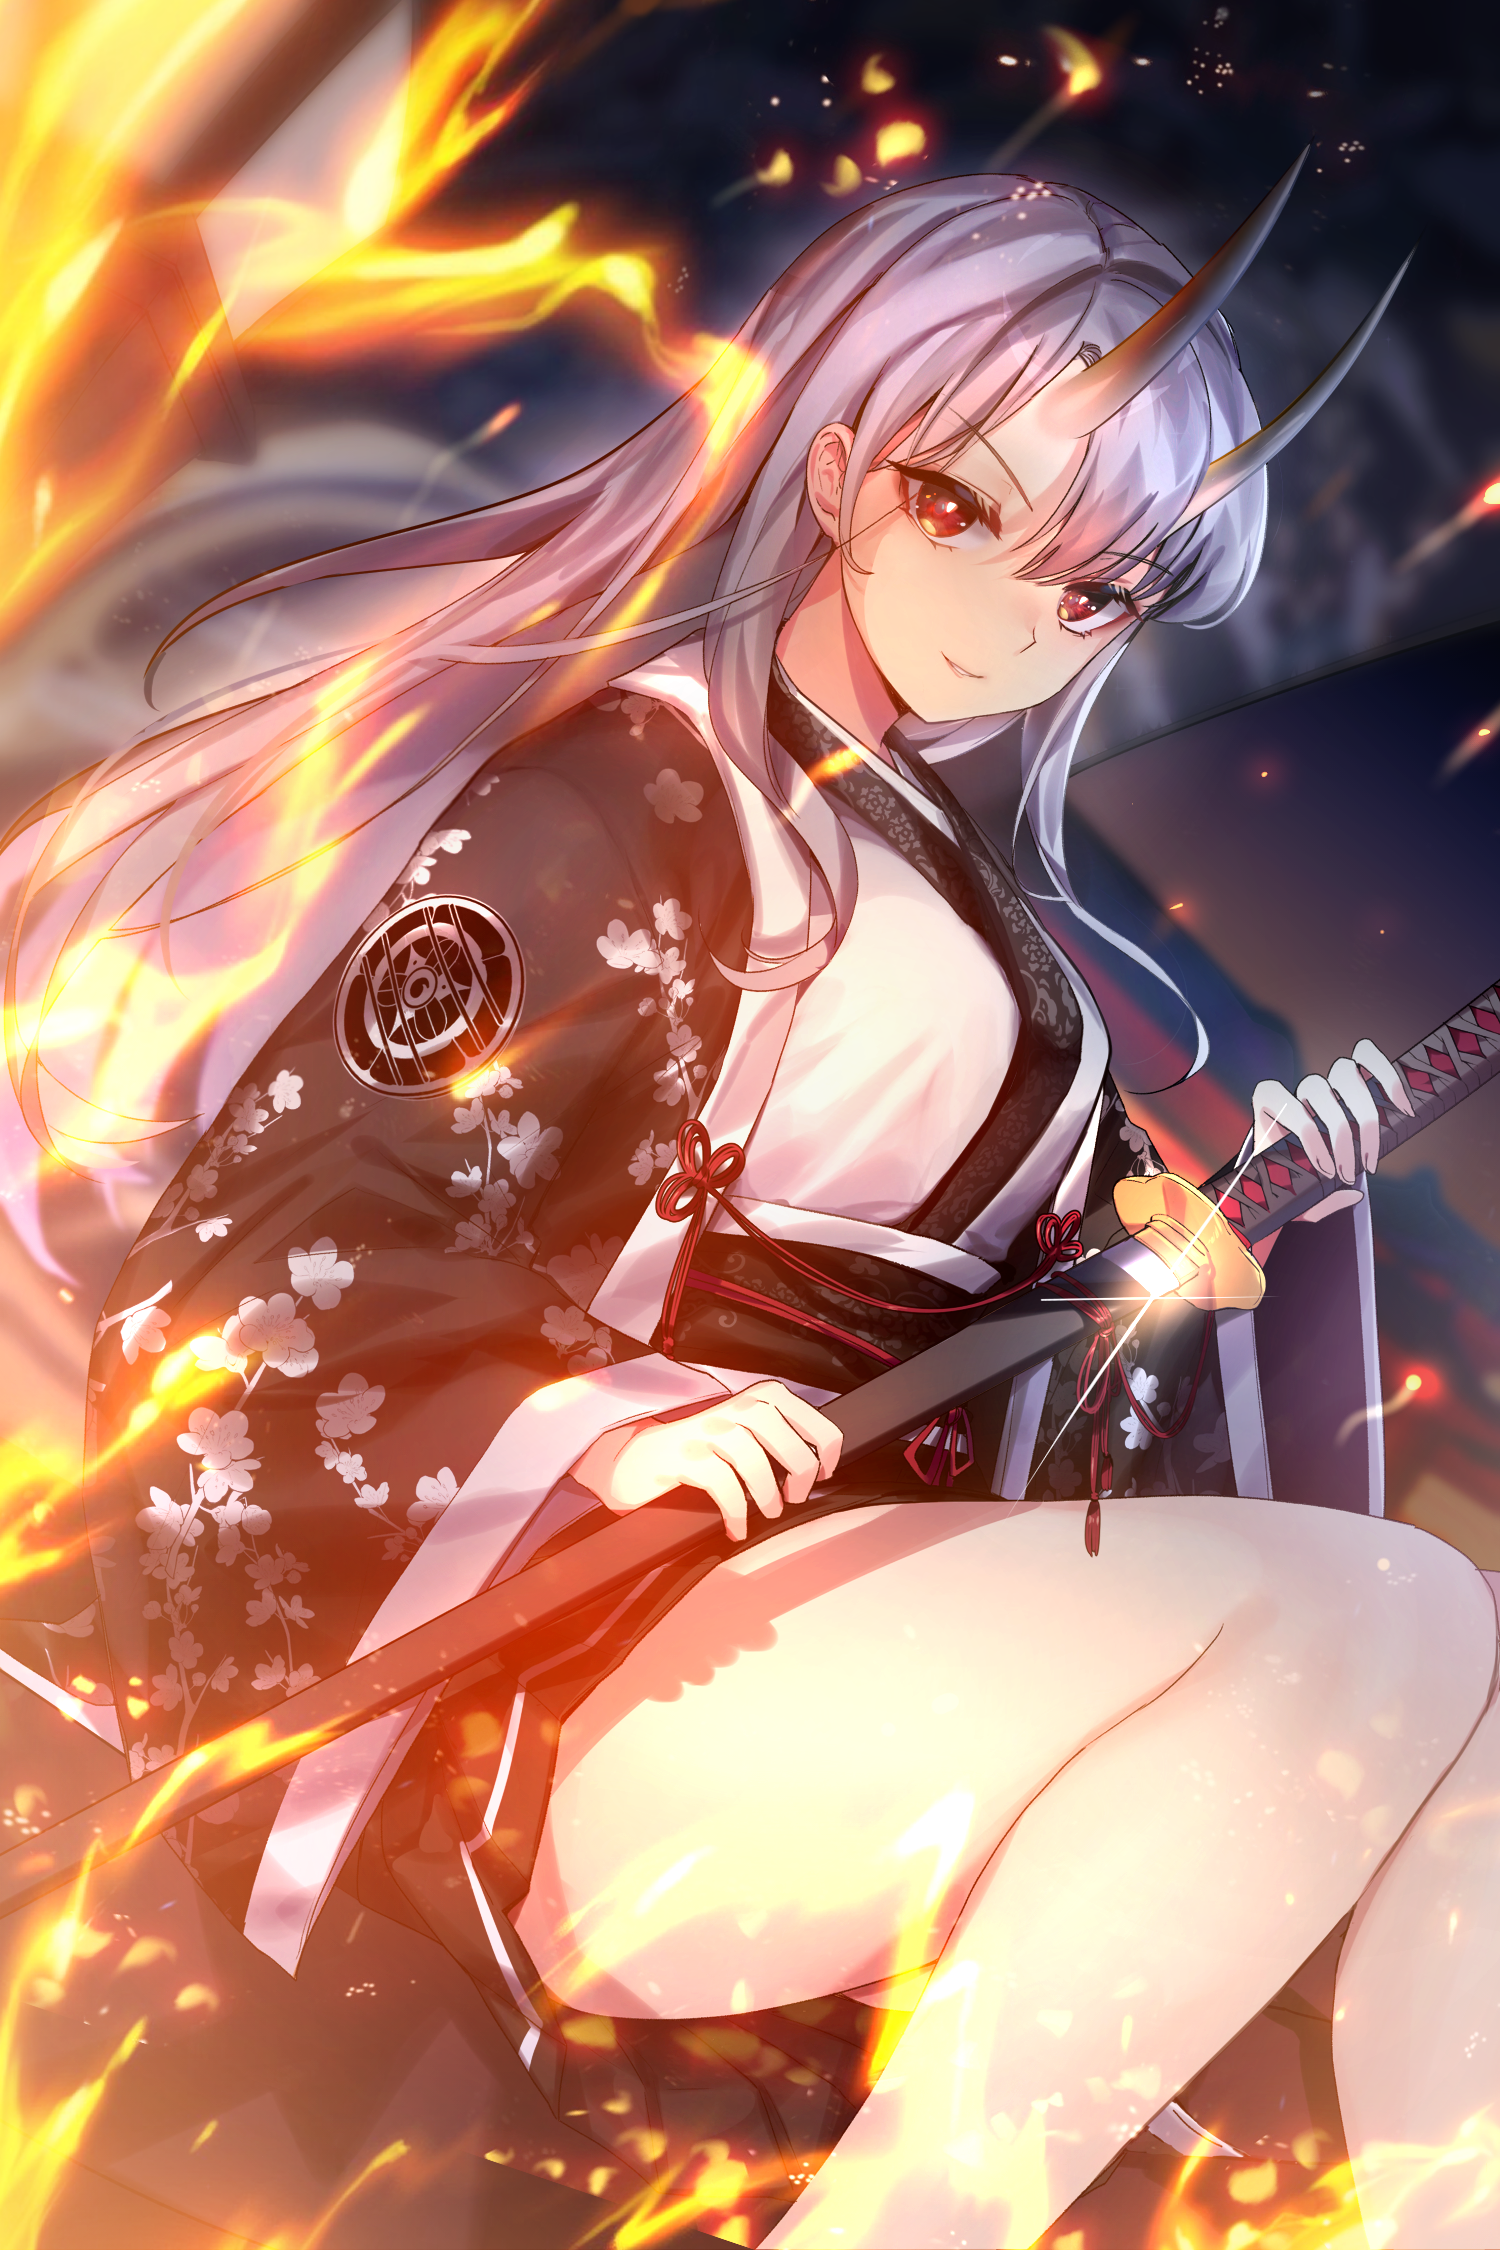 Anime 1500x2250 anime girls anime horns sword weapon thighs fantasy art fantasy girl red eyes fire burning girls with guns women with swords thighs together katana